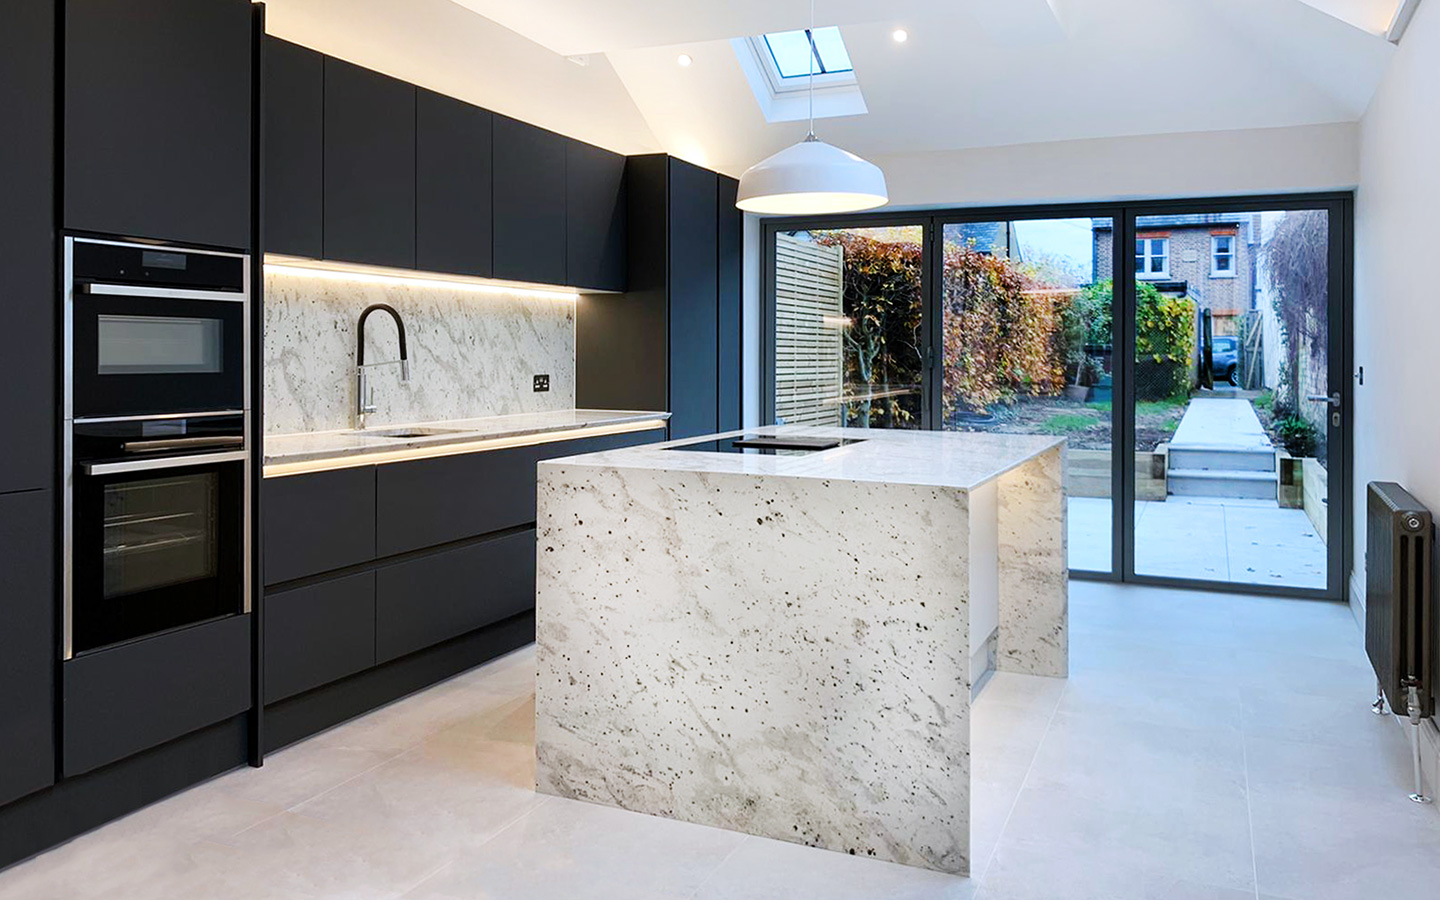 Kitchen island with Andromeda White granite waterfalls and 300mm overhang for seating